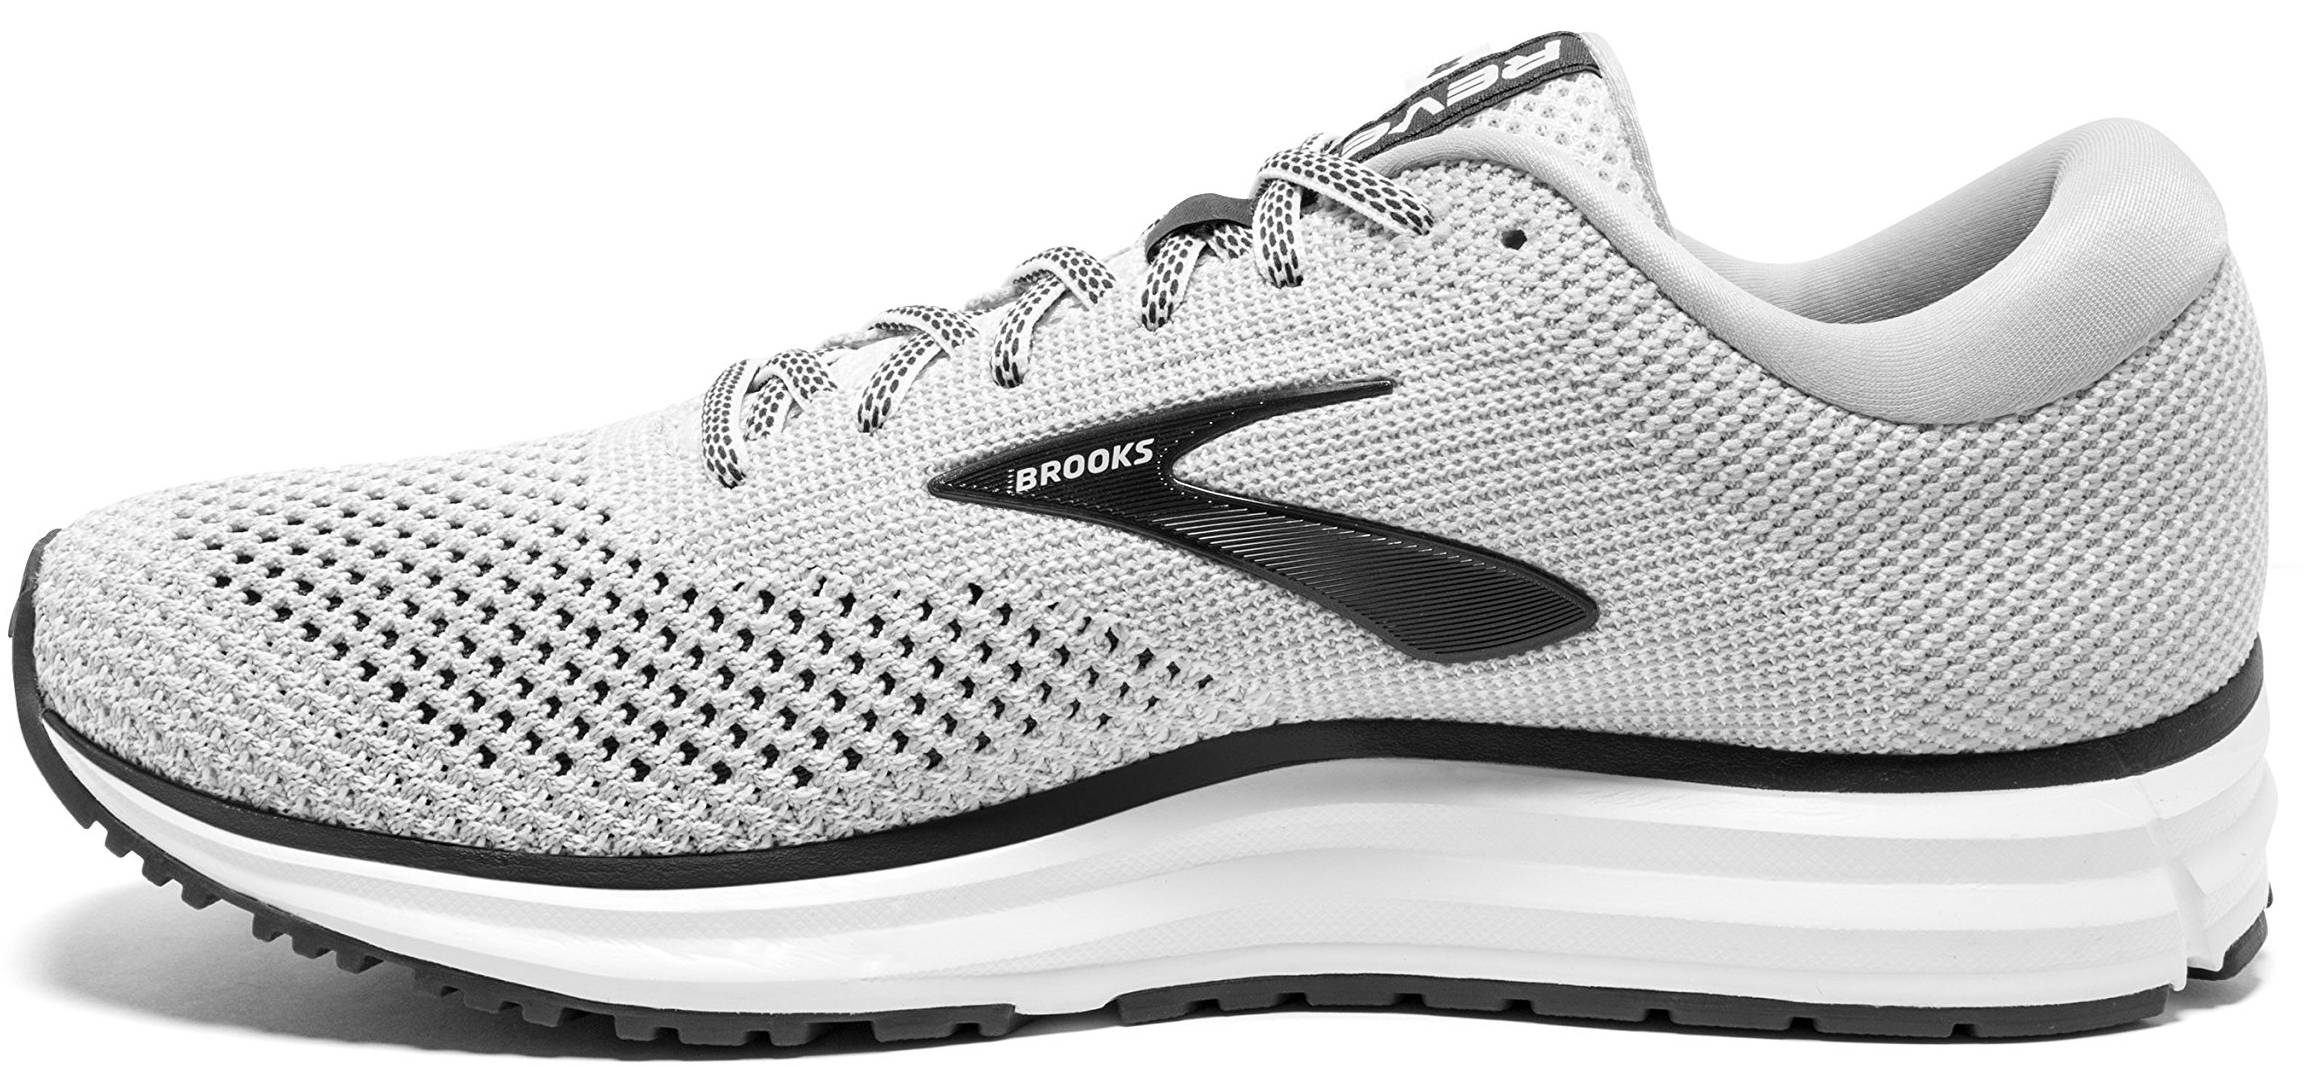 Only $55 + Review of Brooks Revel 2 